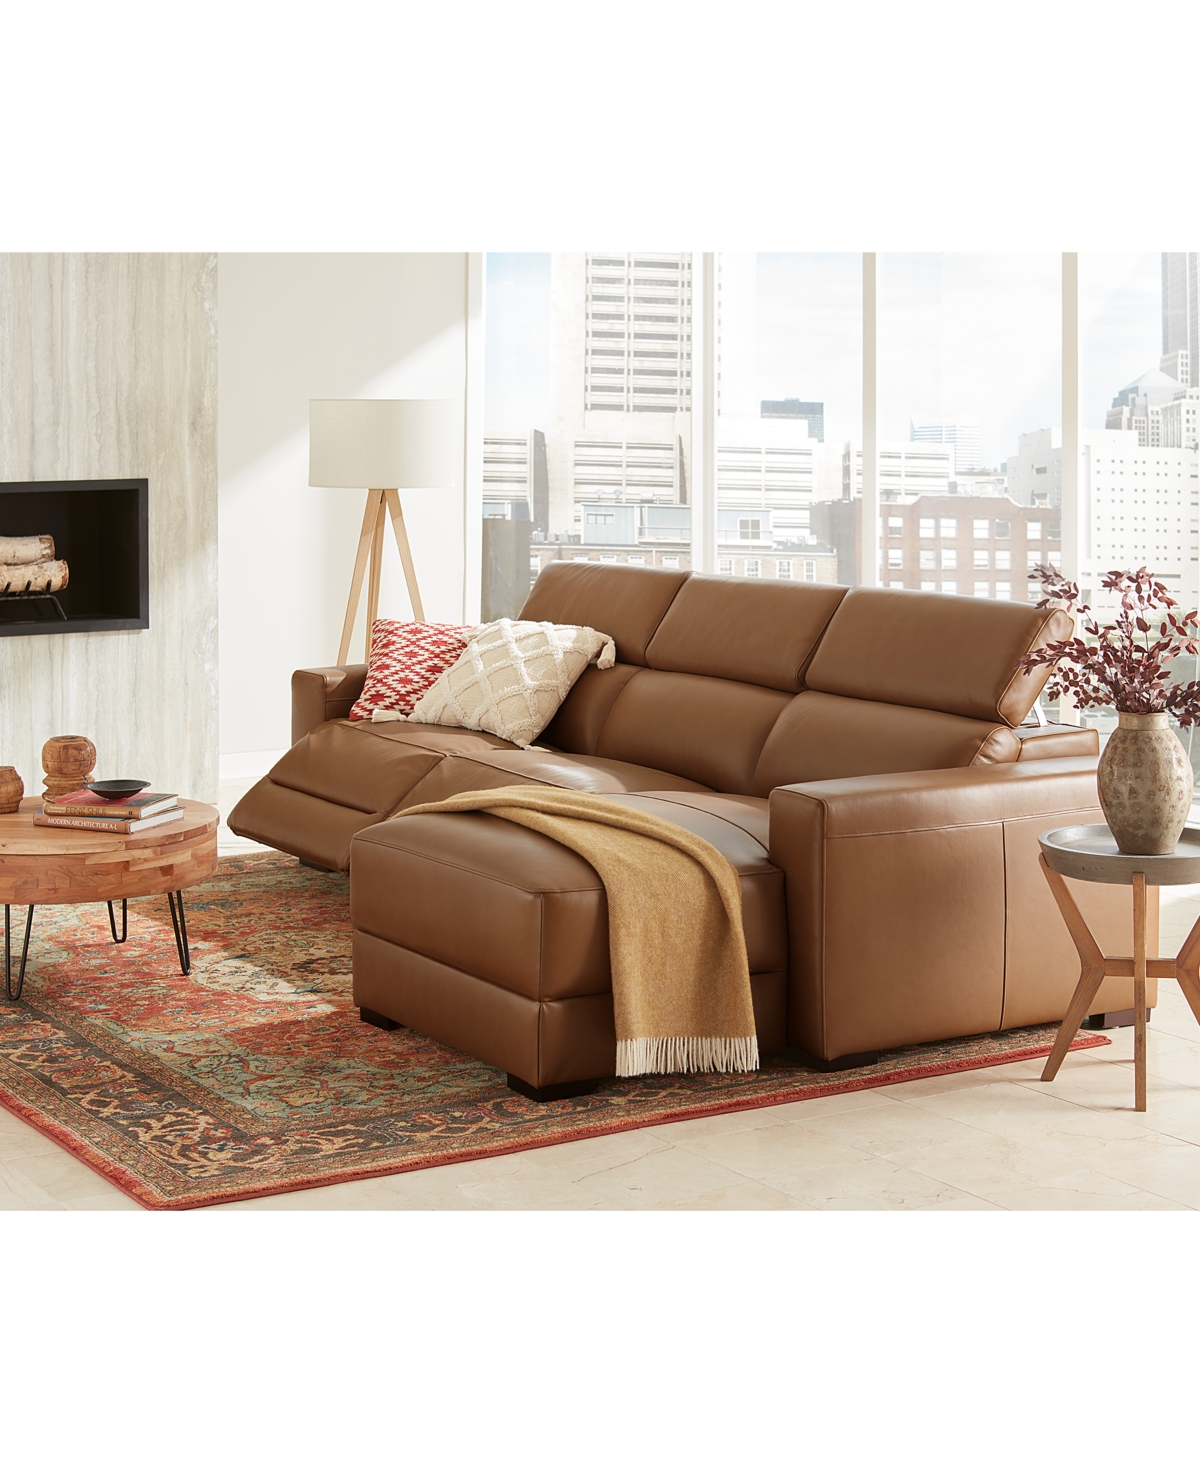 Shop Macy's Nevio 157" 6-pc. Leather Sectional With 3 Power Recliners And Headrests, Created For  In Light Grey